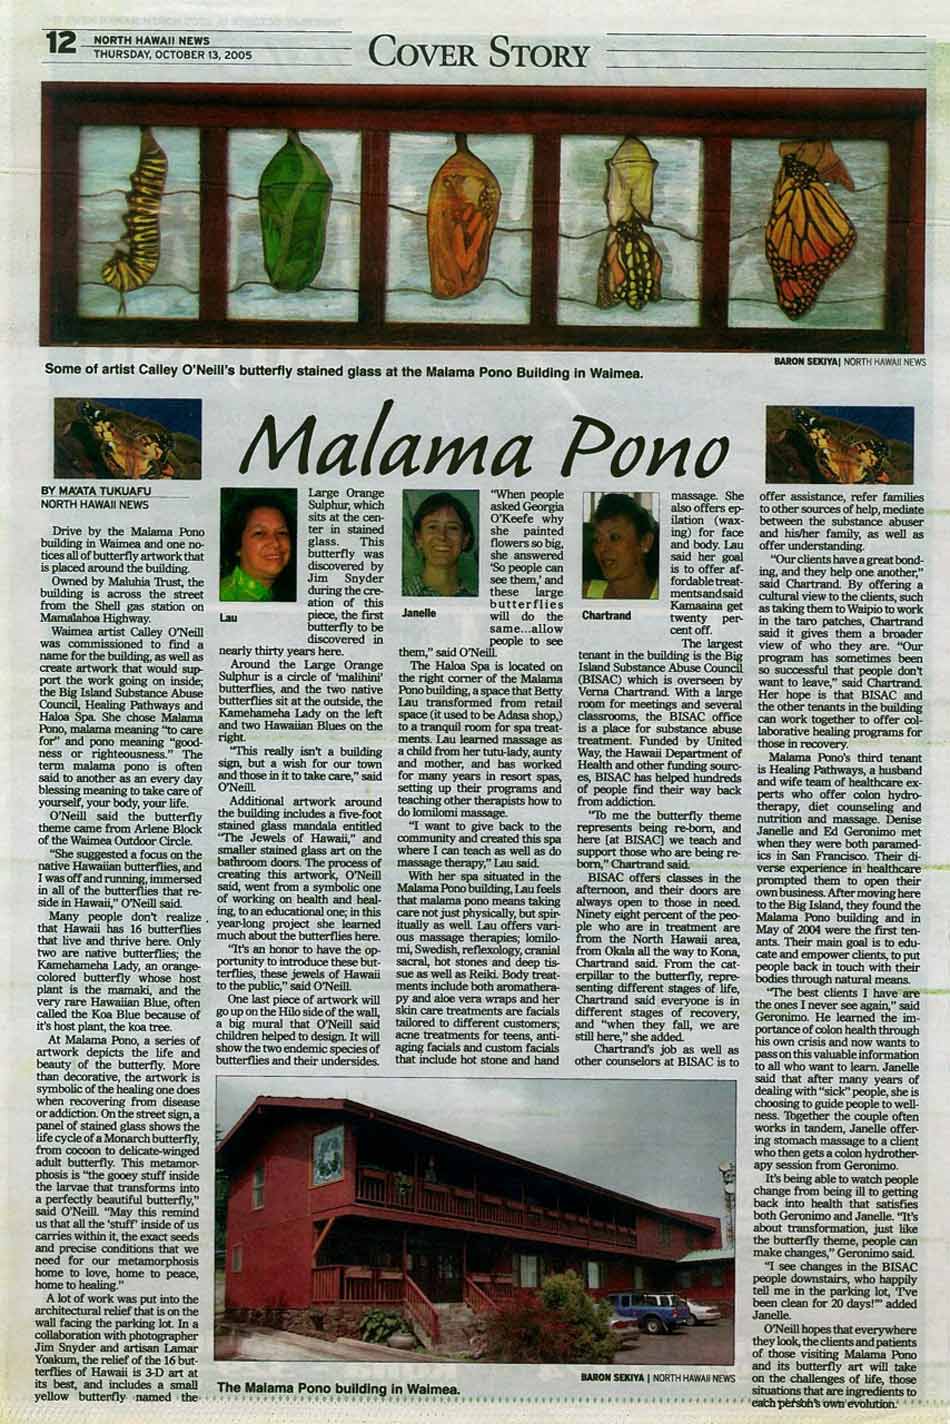 Waimea artist Calley O'Neill was commissioned to find a name for the building, as ell as create artwork that would support the work going on inside; the Big Island Substance Abuse Council, Healing Pathways and Haloa Spa.  She chose Malama Pono, malama meaning "to care for' and pono meaning 'goodness or righteousness.'  The term malama pono is often said to another as an everyday blessing meaning to take care of yourself, your body, your life.